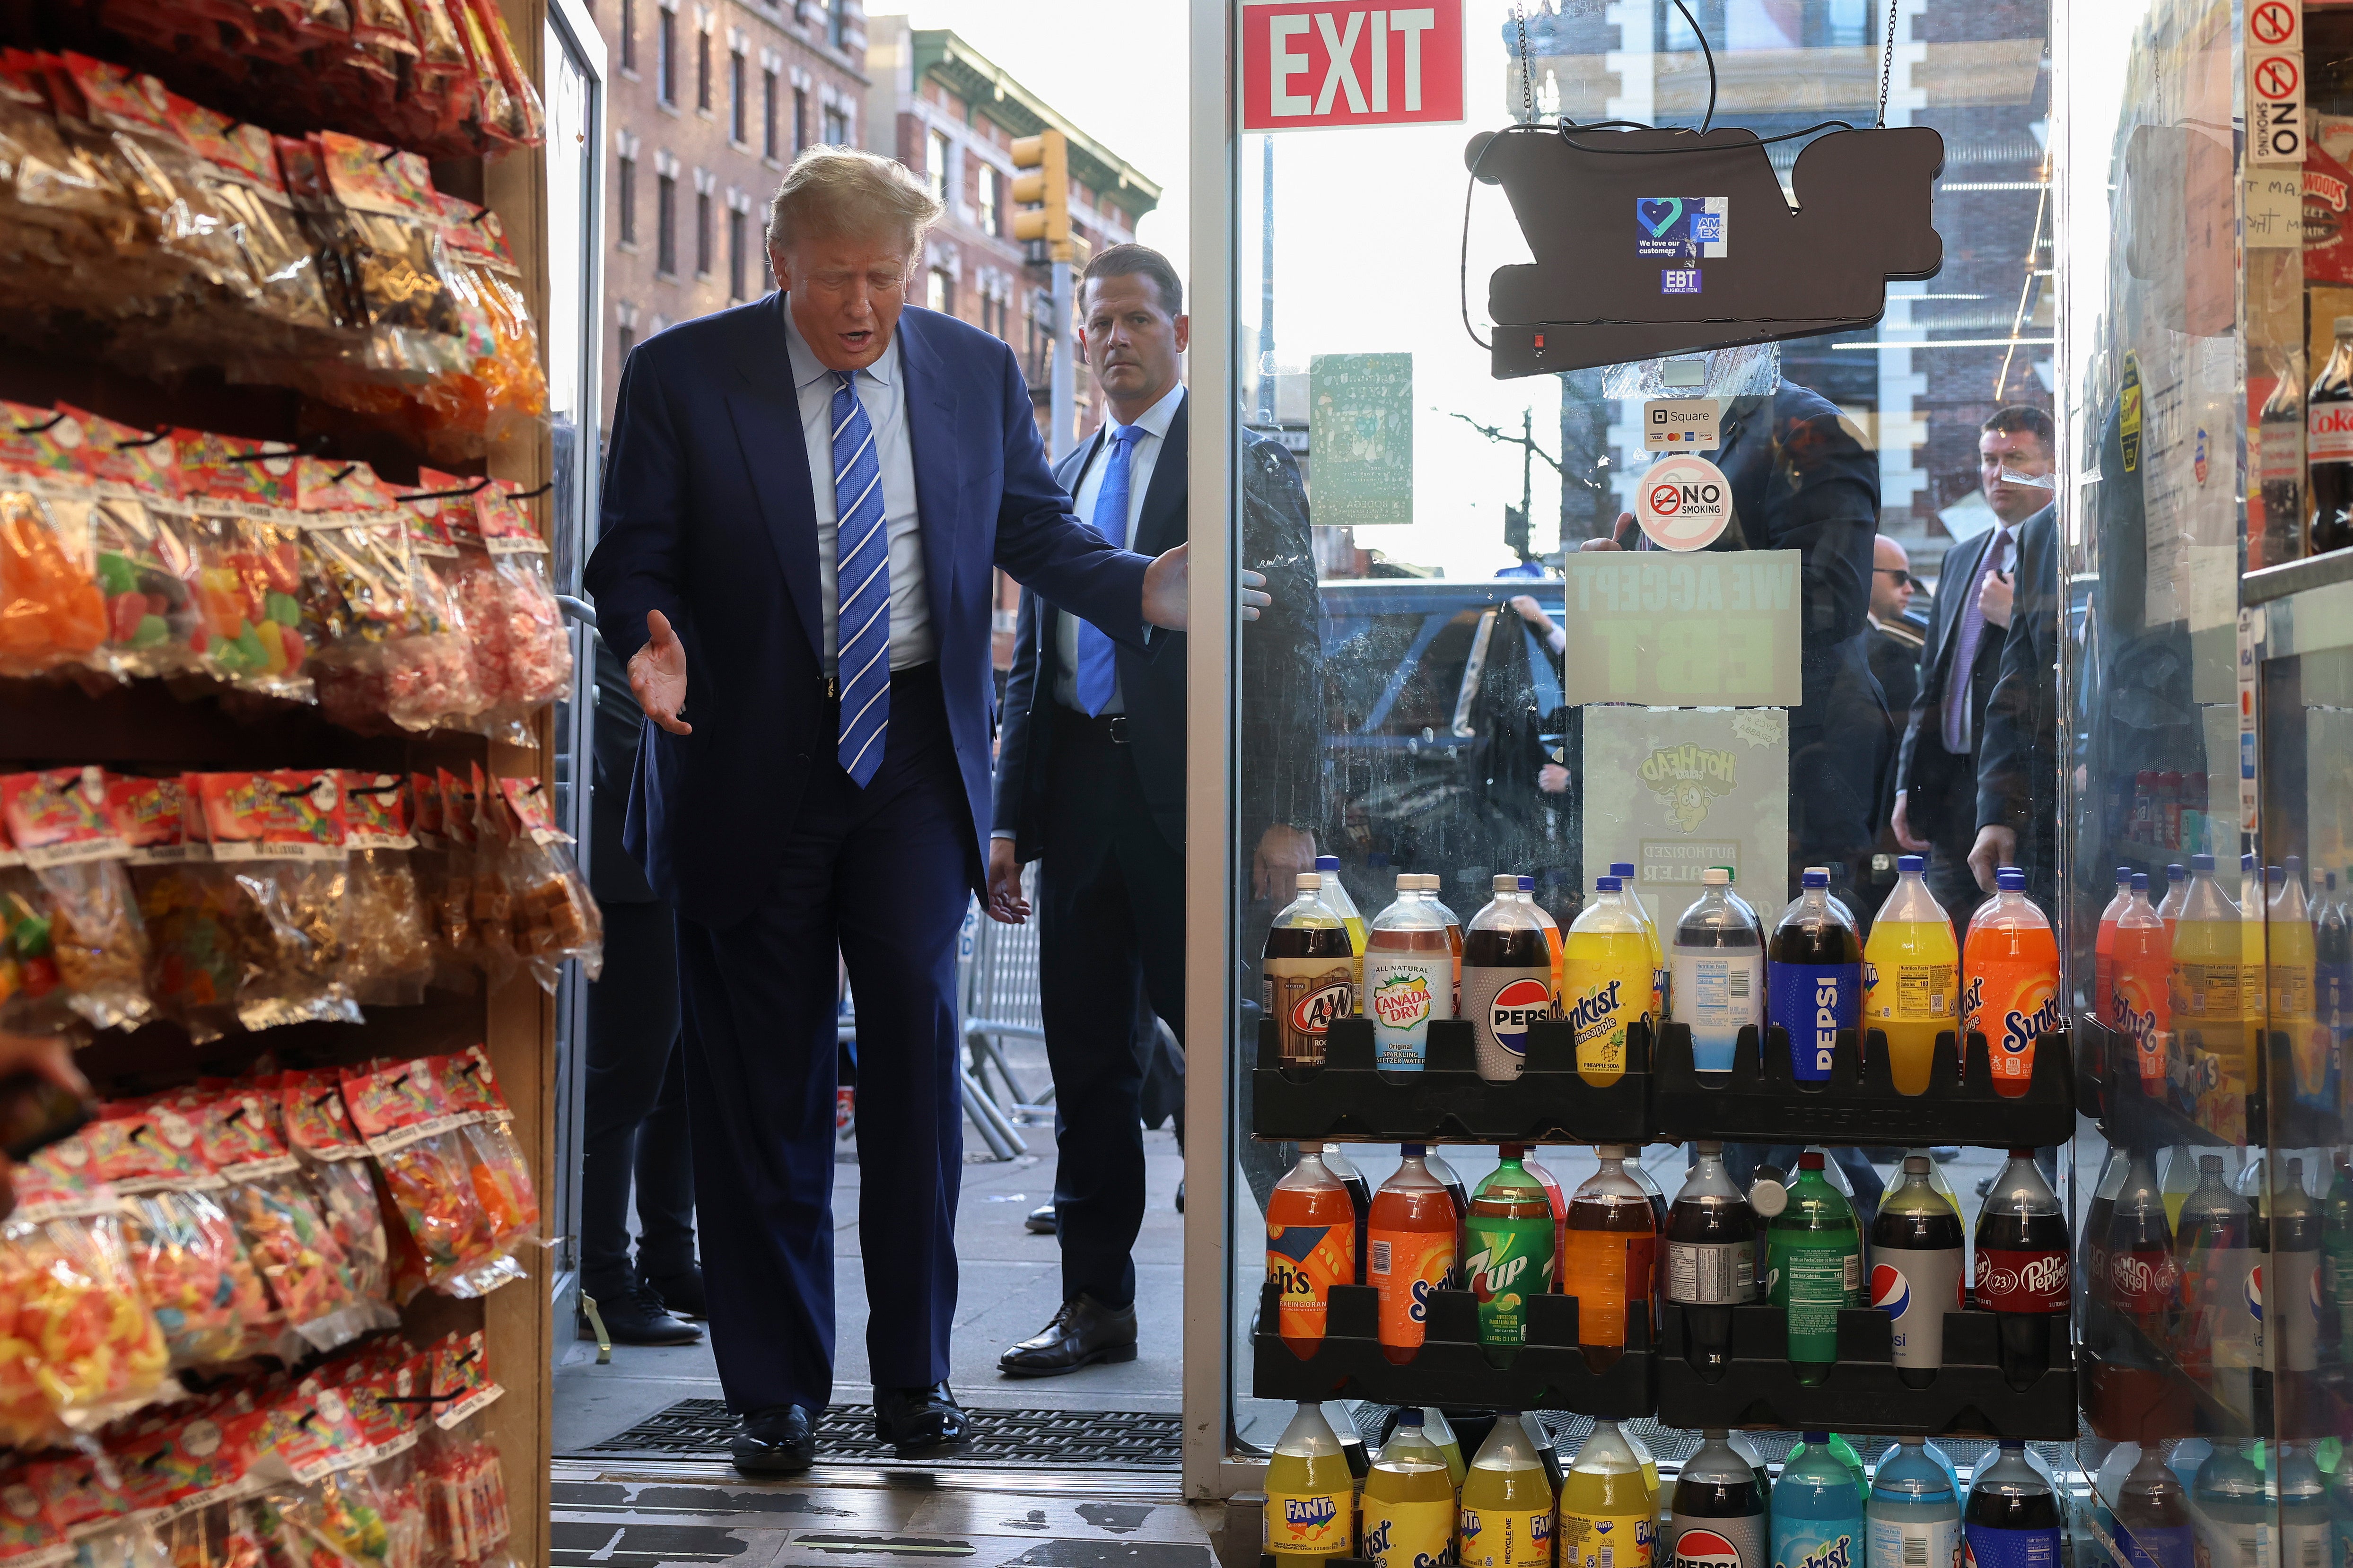 Former president Donald Trump reacts as he enters the Sanaa convenience store in Harlem on Tuesday afternoon